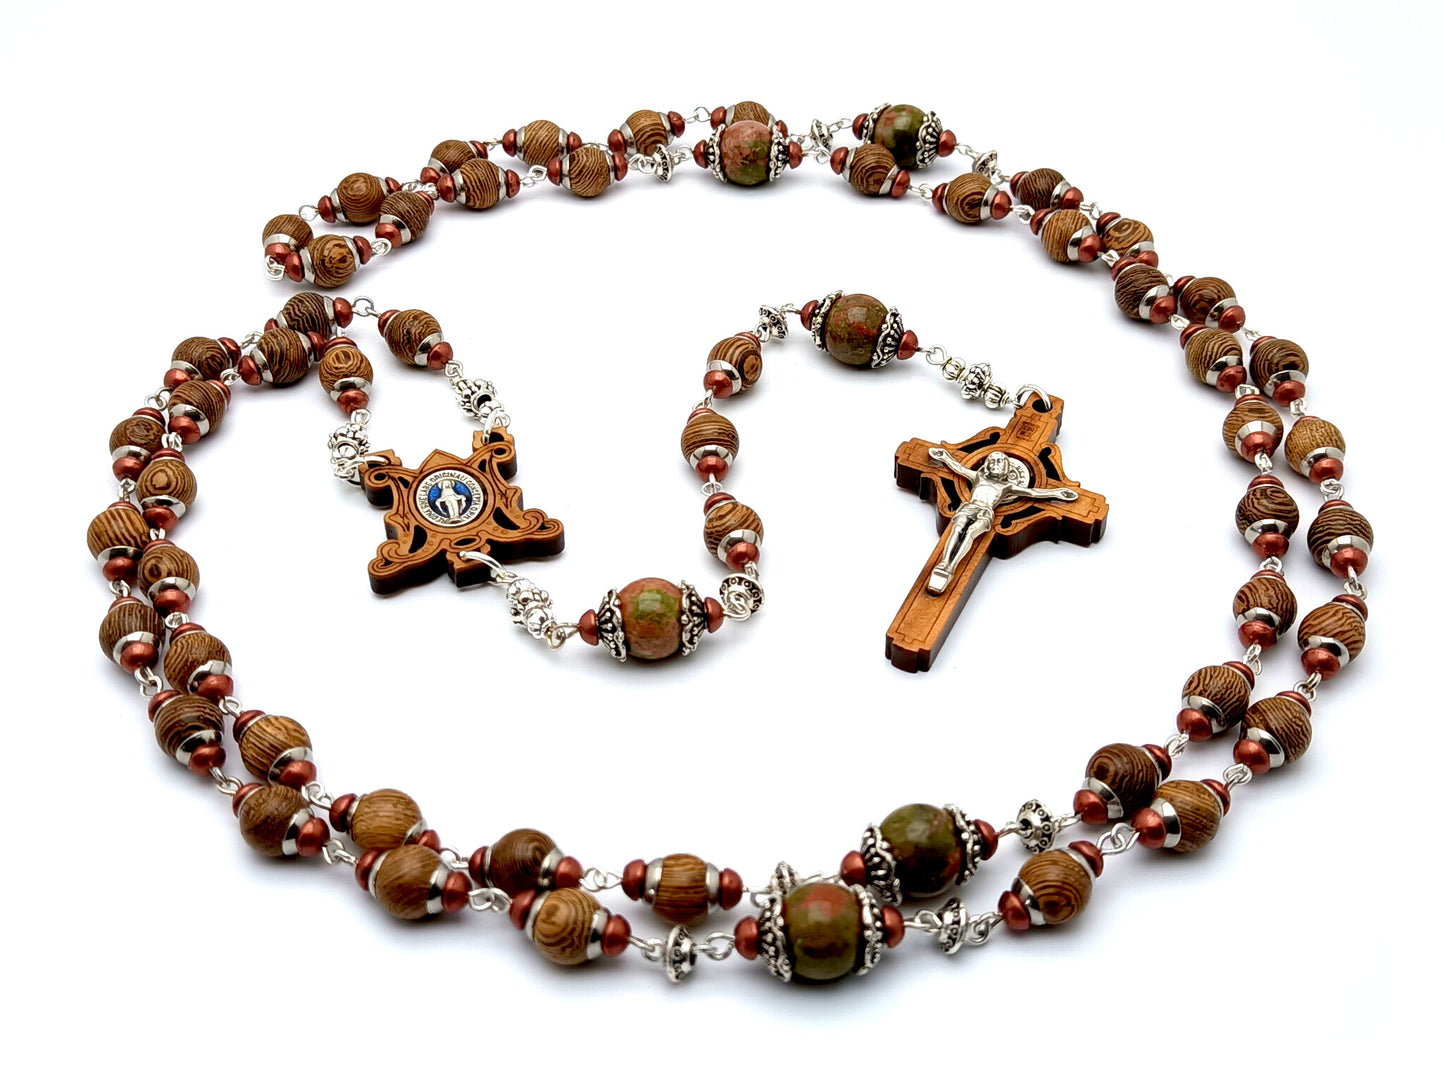 Miraculous Medal unique rosary beads with dark wood and gemstone beads, olive wood Sint Benedict crucifix and olive wood centre medal.